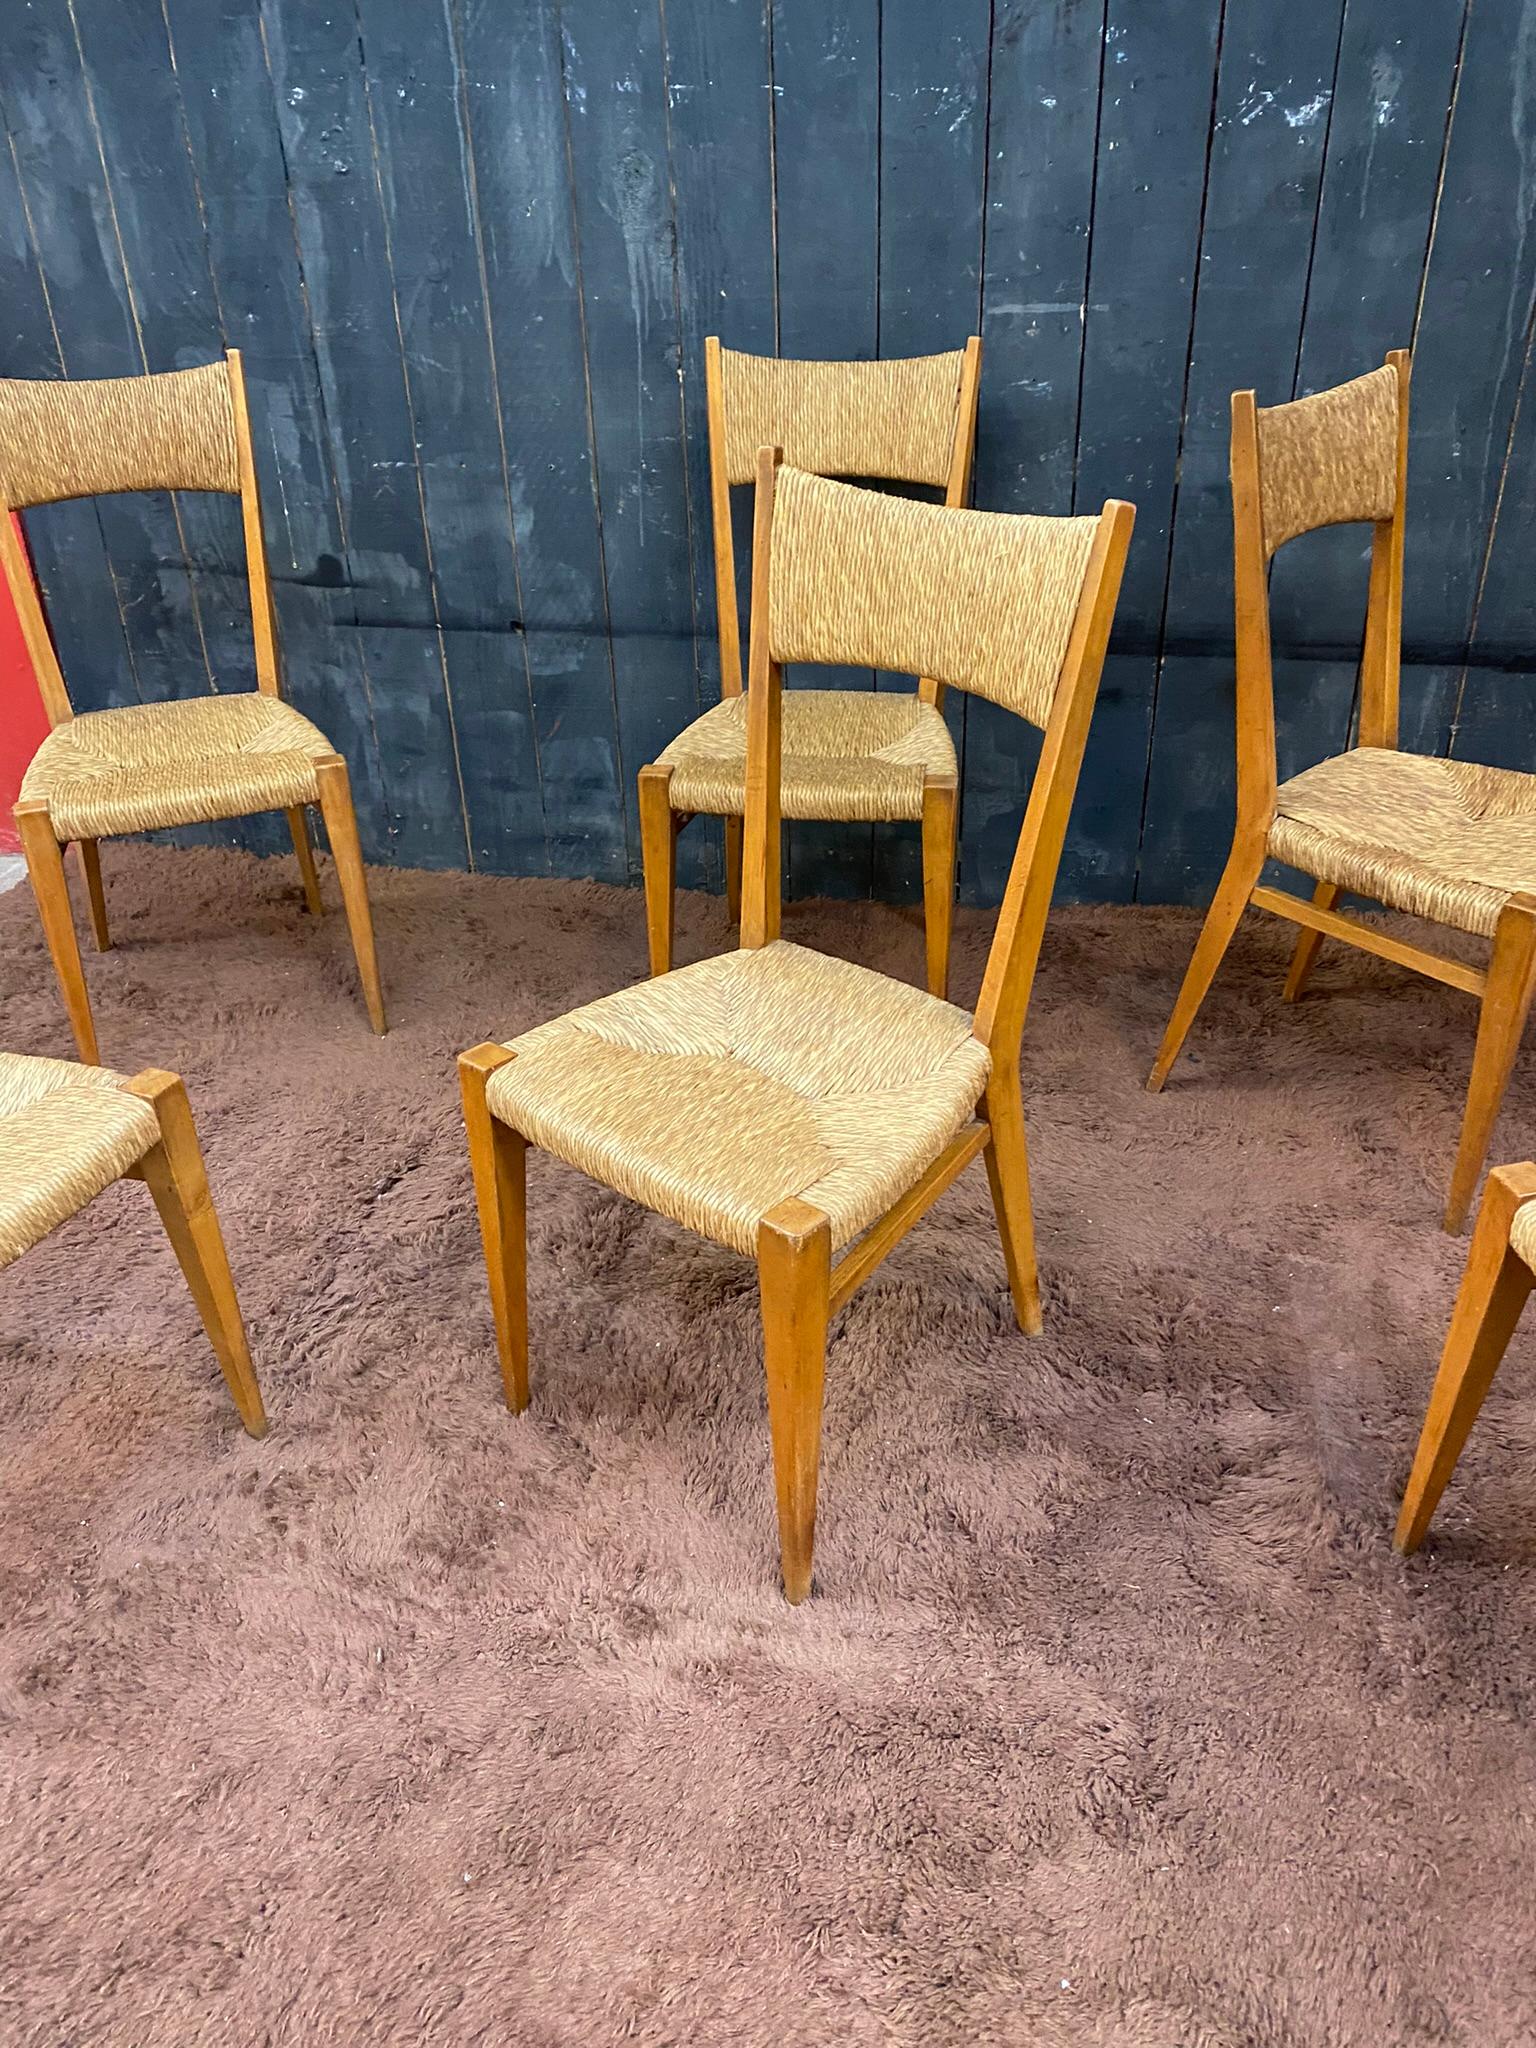 Series of 6 Elegant Oak Chairs, French Reconstruction Period, circa 1950 For Sale 1